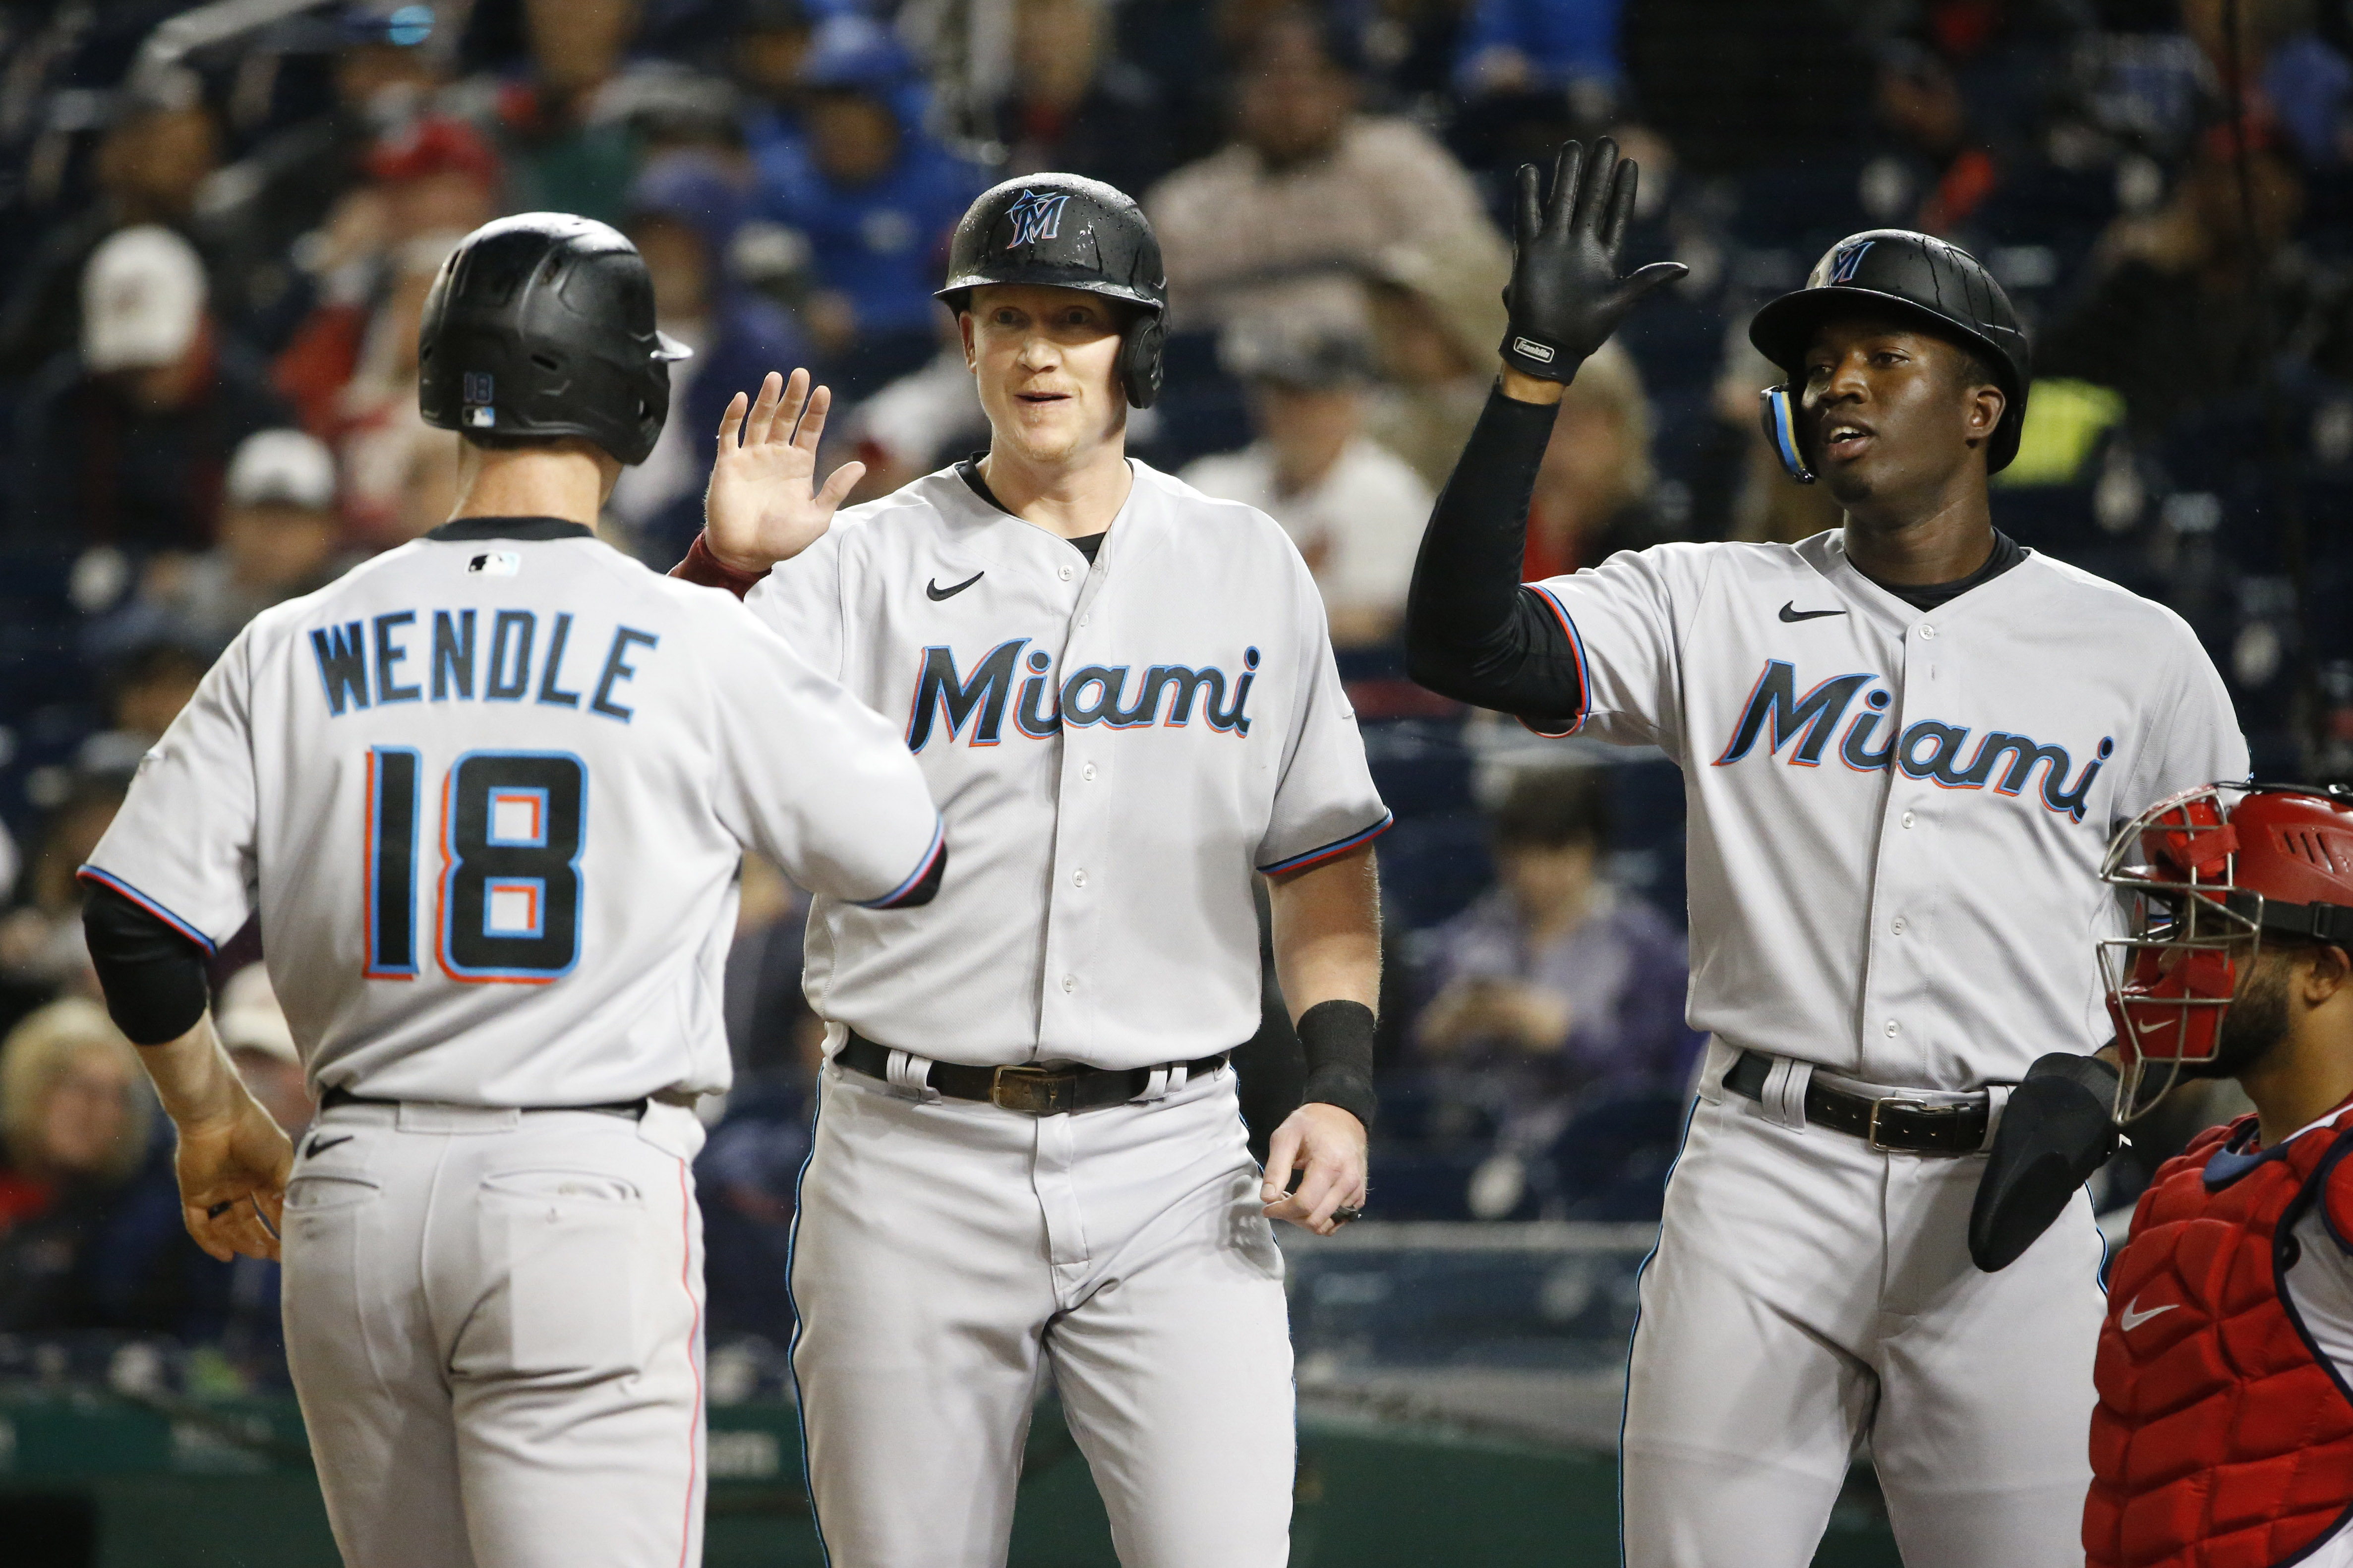 Miami Marlins shortstop Joey Wendle (18) celebrates with Marlins designated hitter Garrett Cooper (26) and Marlins center fielder Jesus Sanchez (7) at home plate after hitting a three run home run during the fourth inning against the Washington Nationals at Nationals Park.